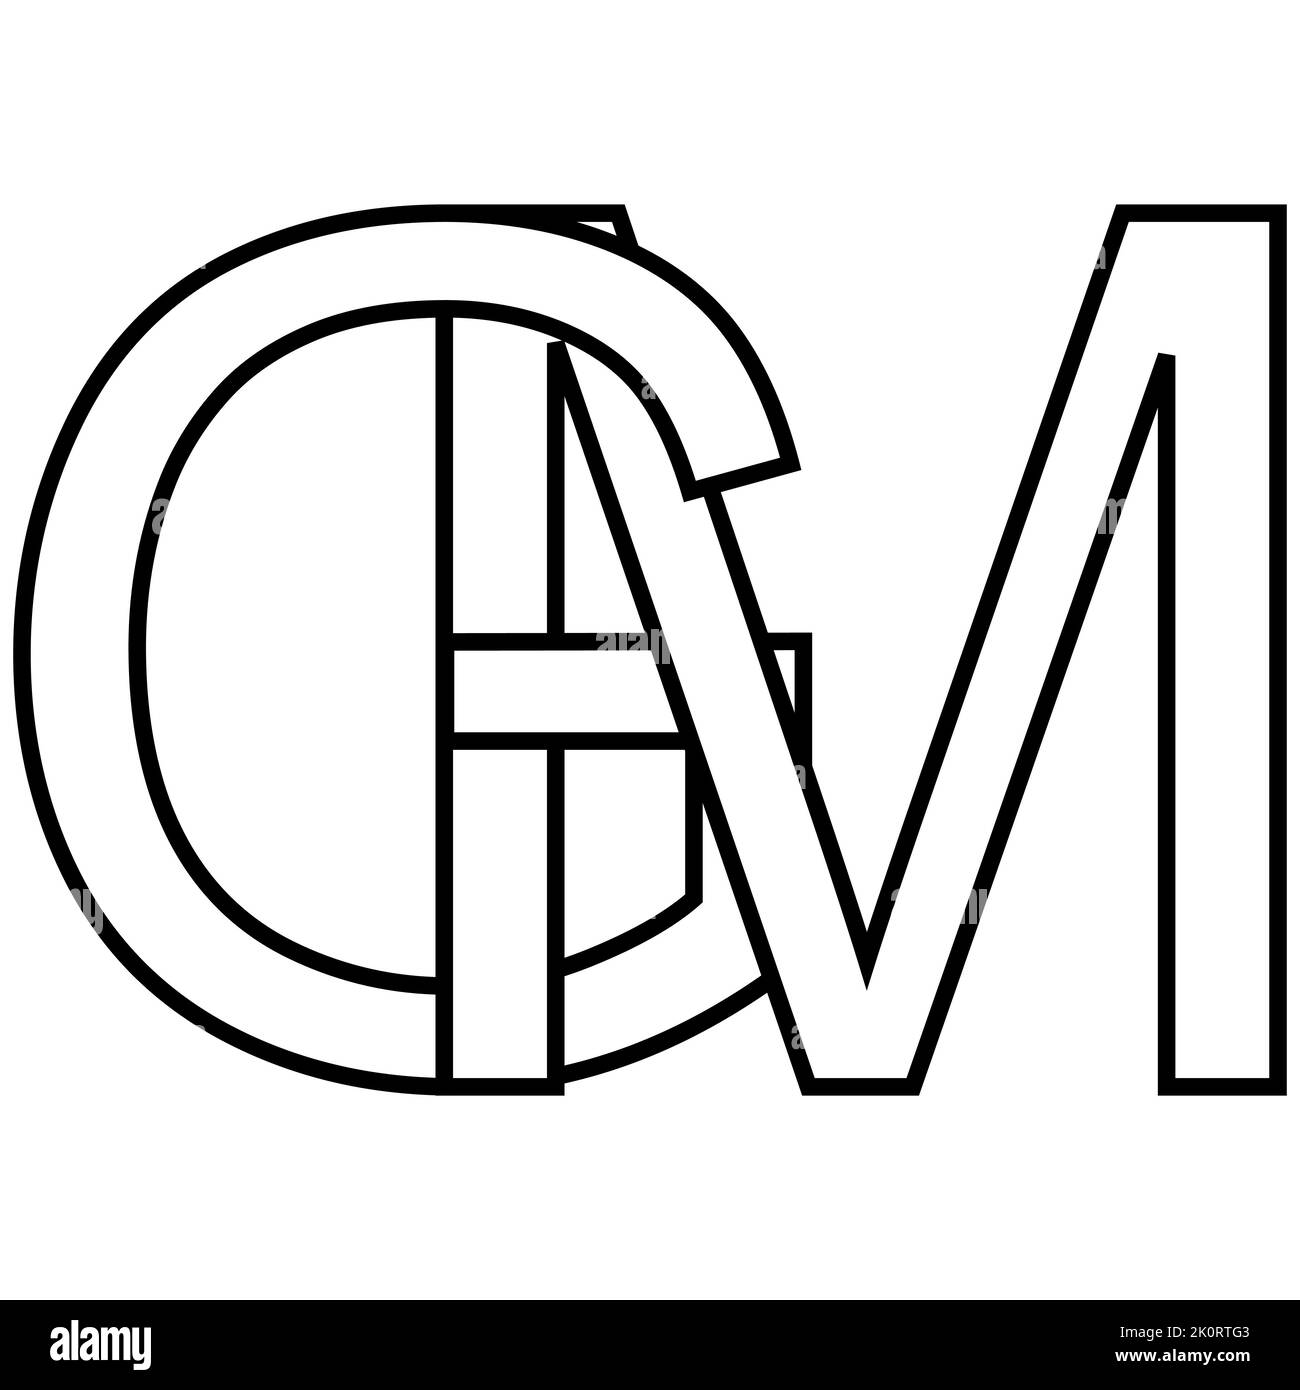 Logo sign gm mg icon nft interlaced letters g m Stock Vector